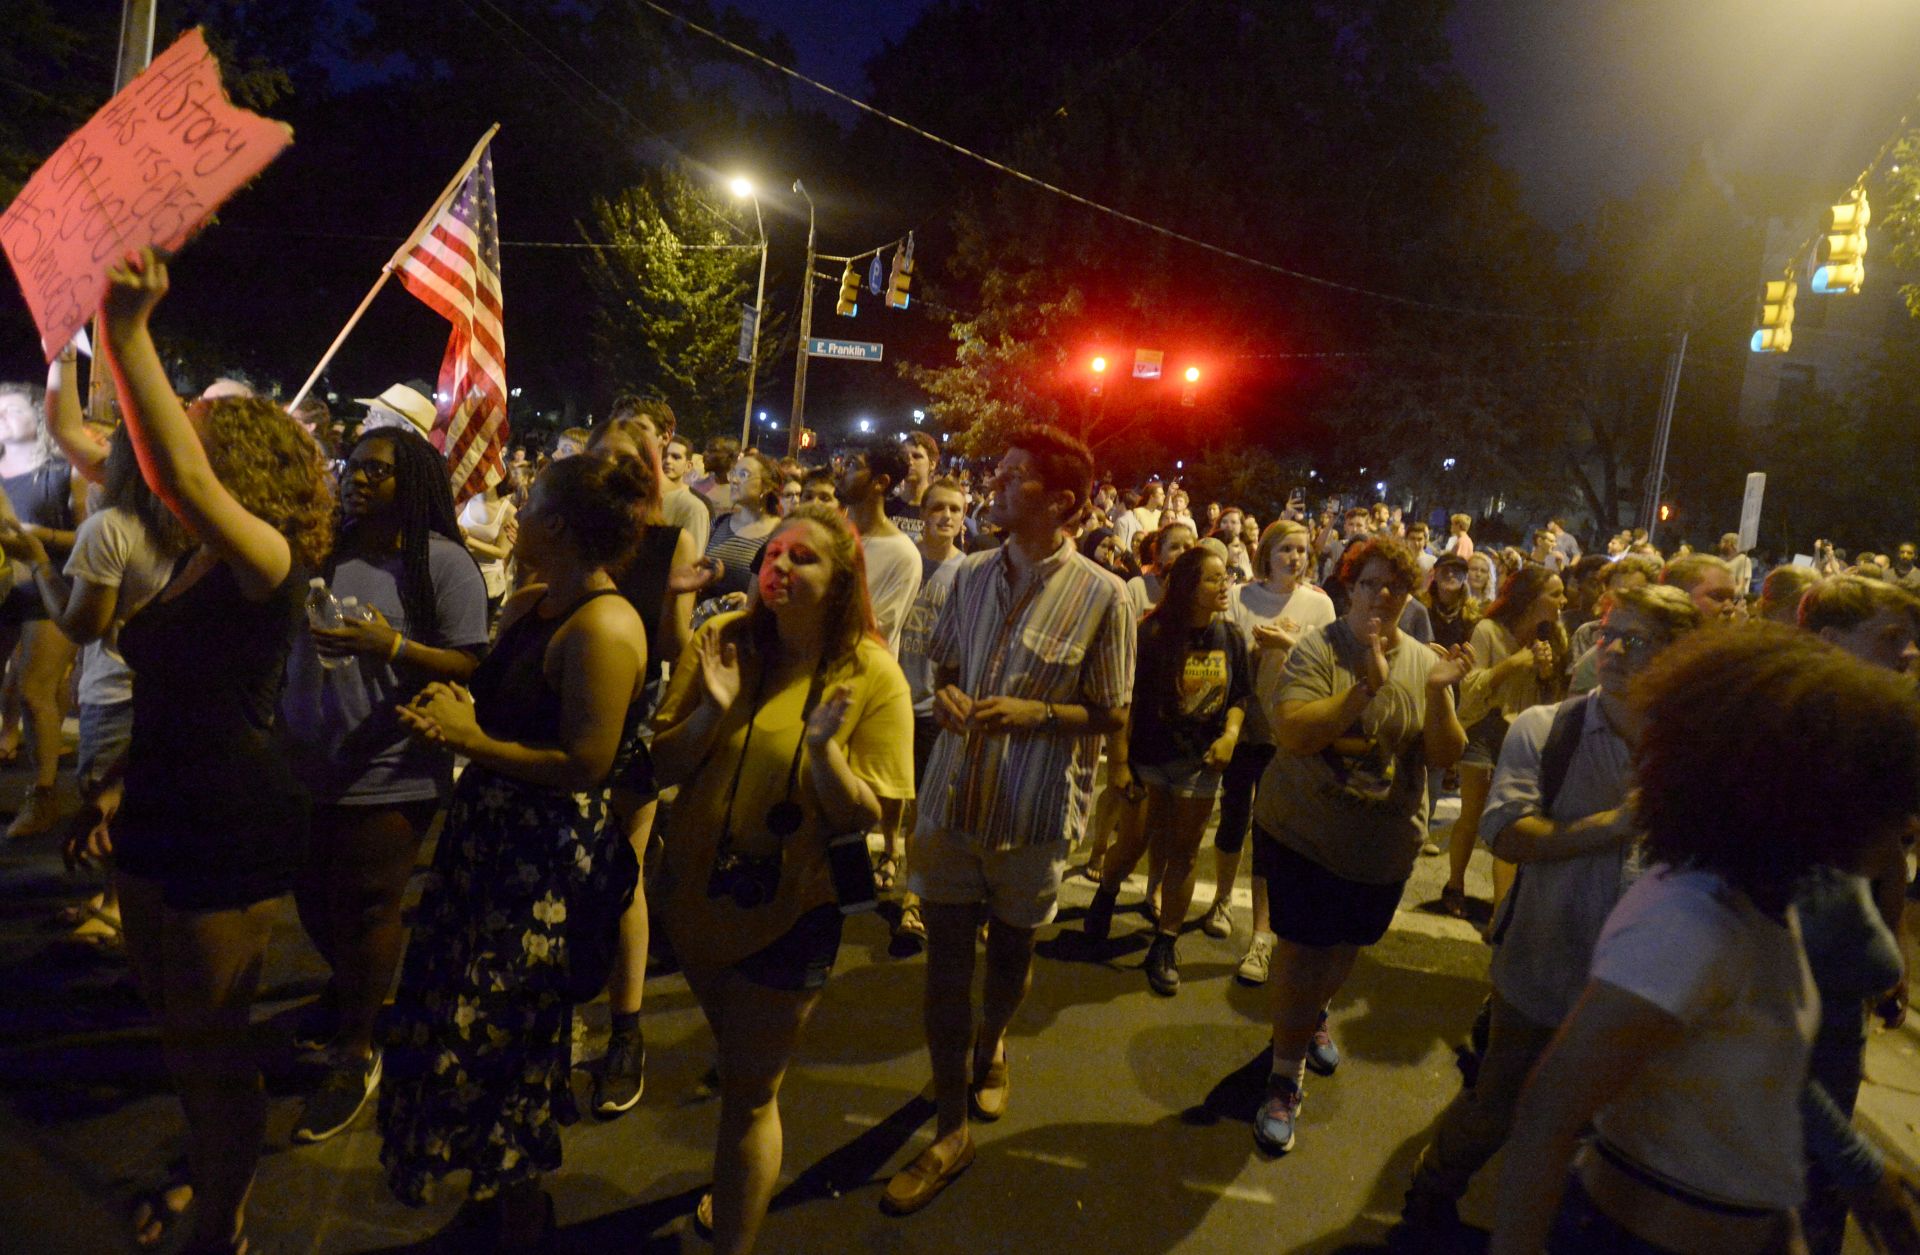 Protesters rally for the removal of a Confederate statue known as Silent Sam from the campus of the University of North Carolina in Chapel Hill on Aug. 22, 2017.